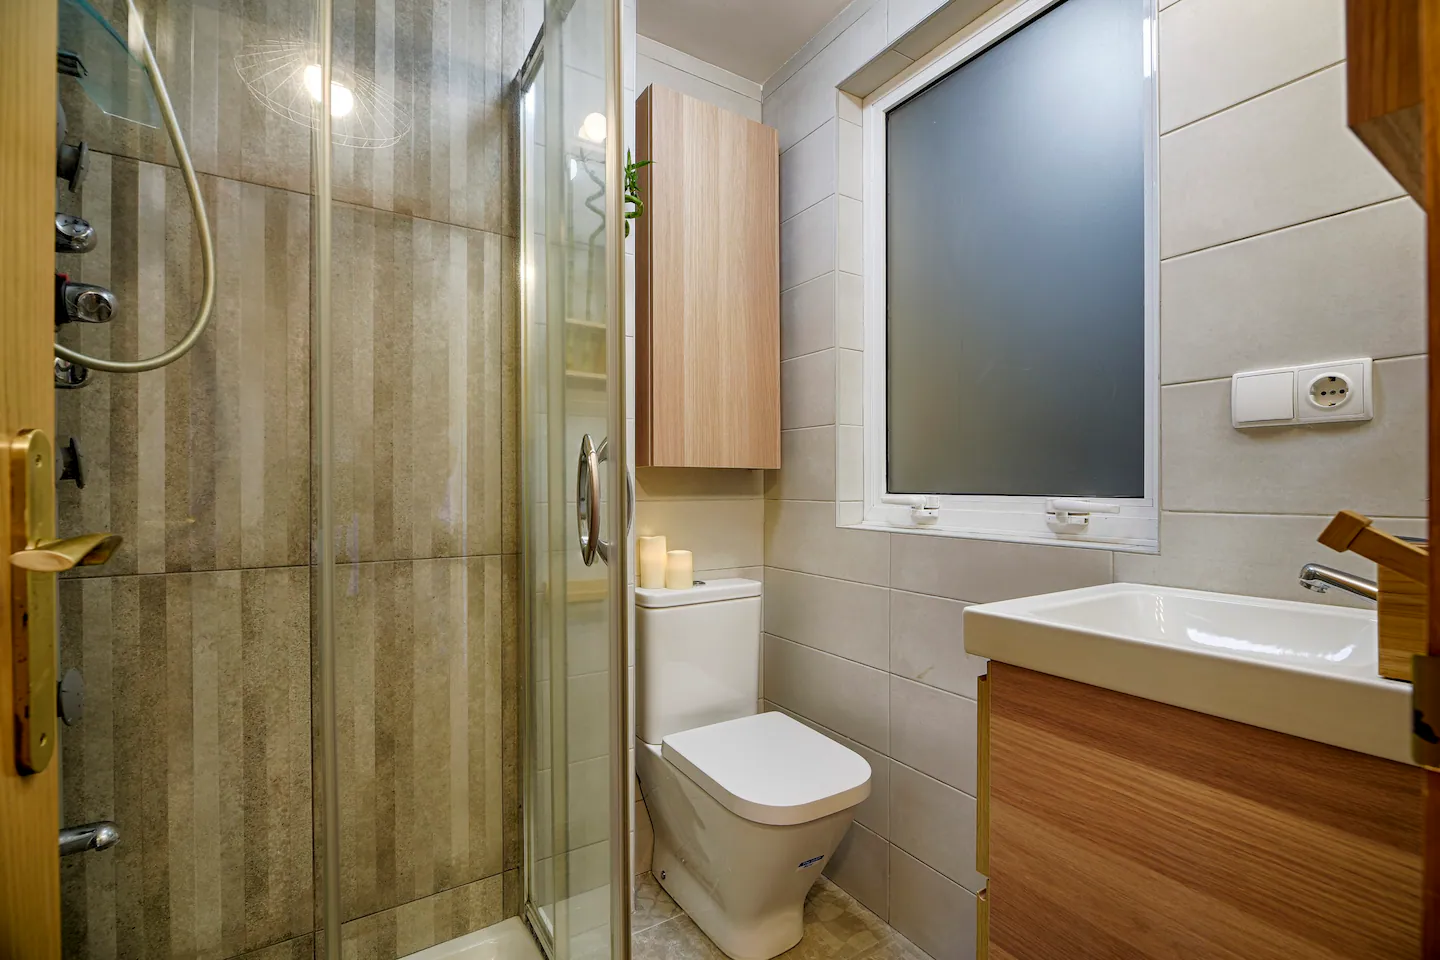 Bathroom - 1 Bedroom apartment for rent in A Coruña